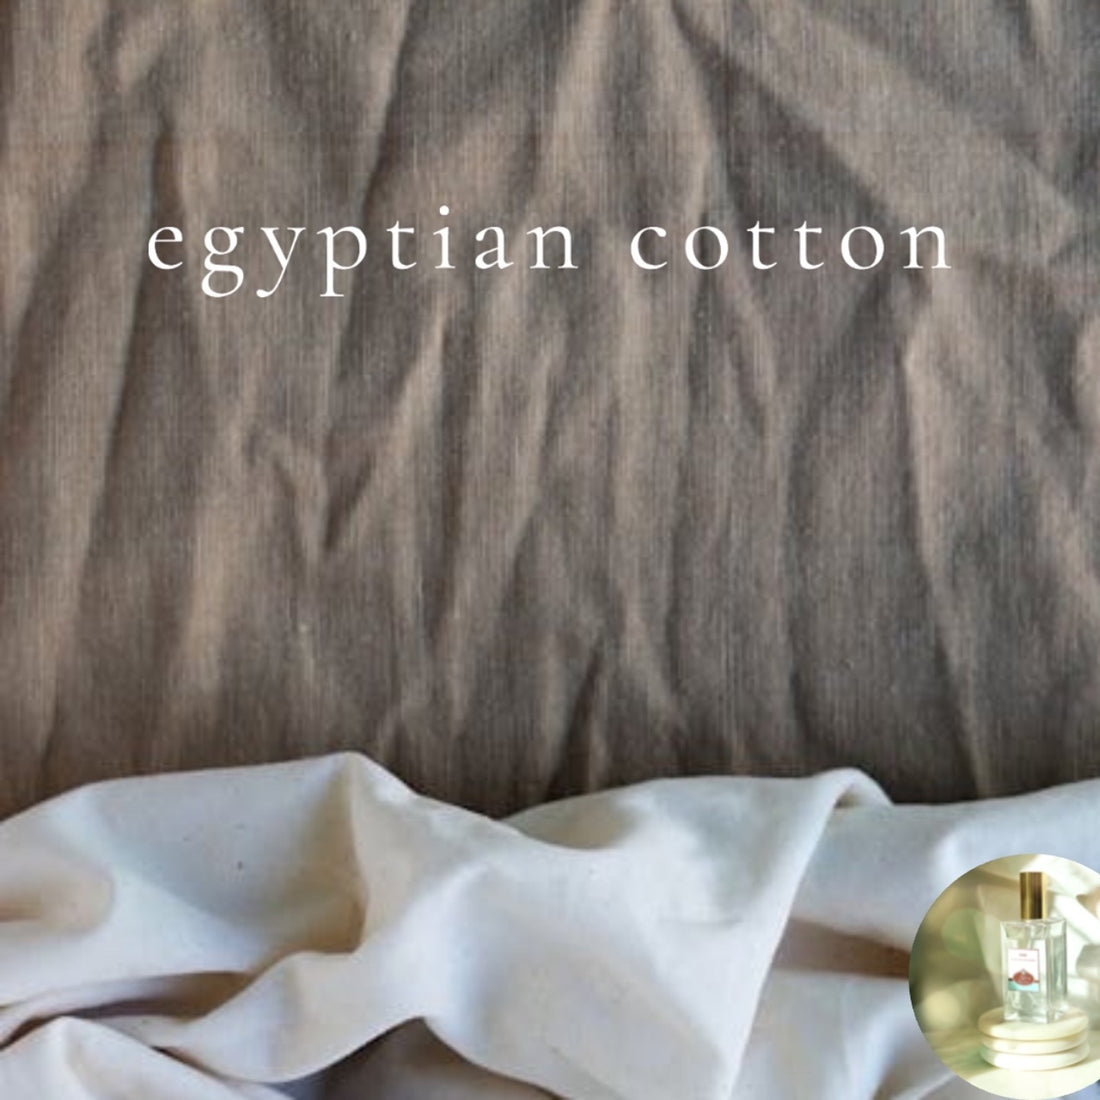 EGYPTIAN COTTON scented Room and Body Spray - Buy 2 Get 2 for 50% off deal